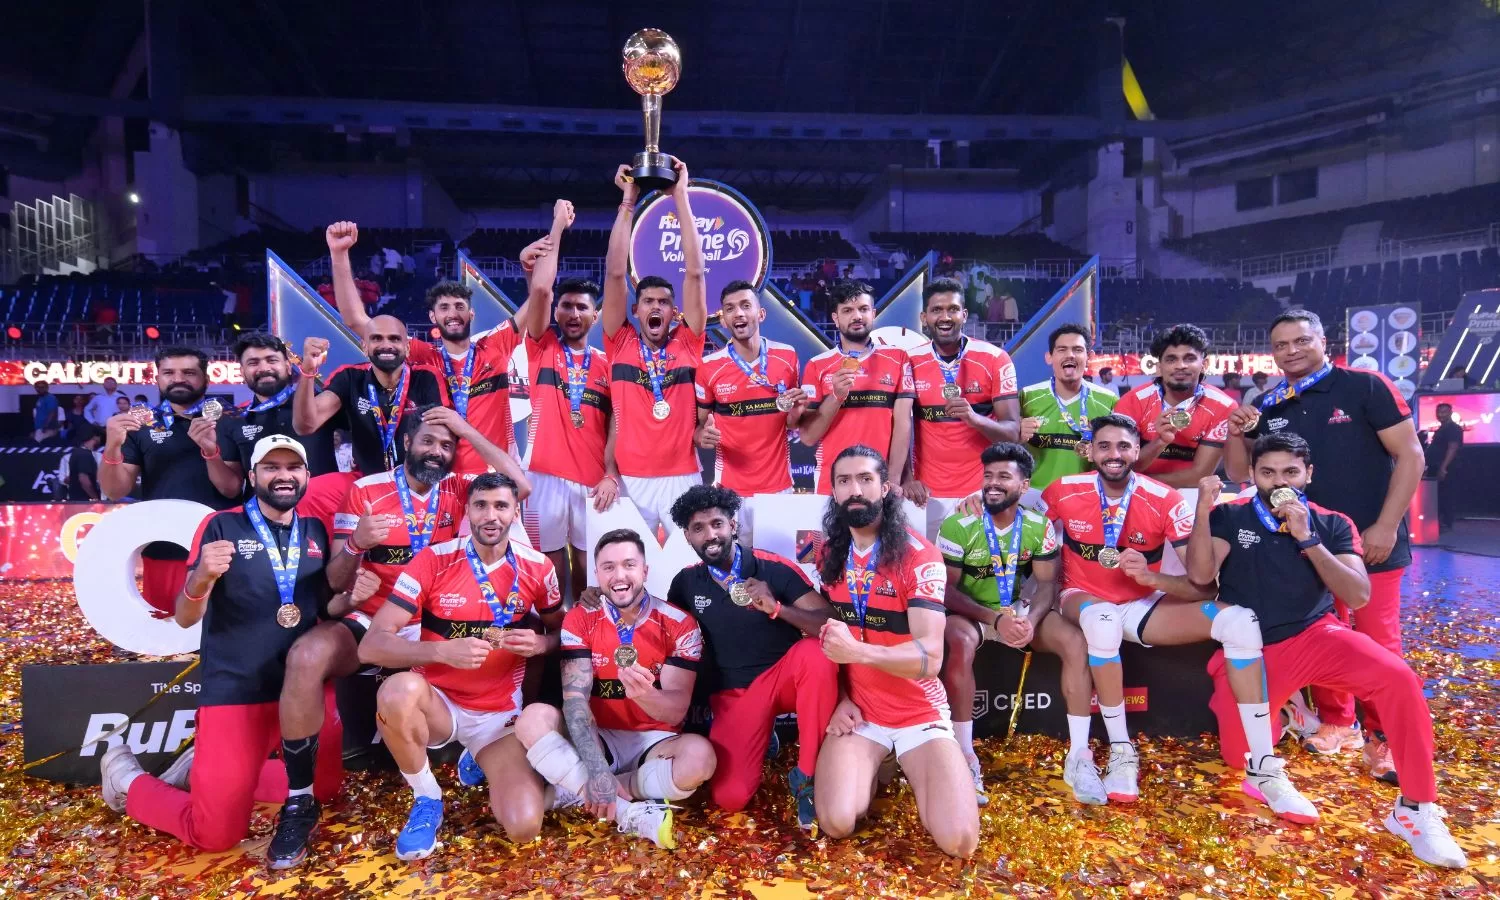 Calicut Heroes players on cloud nine after lifting maiden PVL trophy